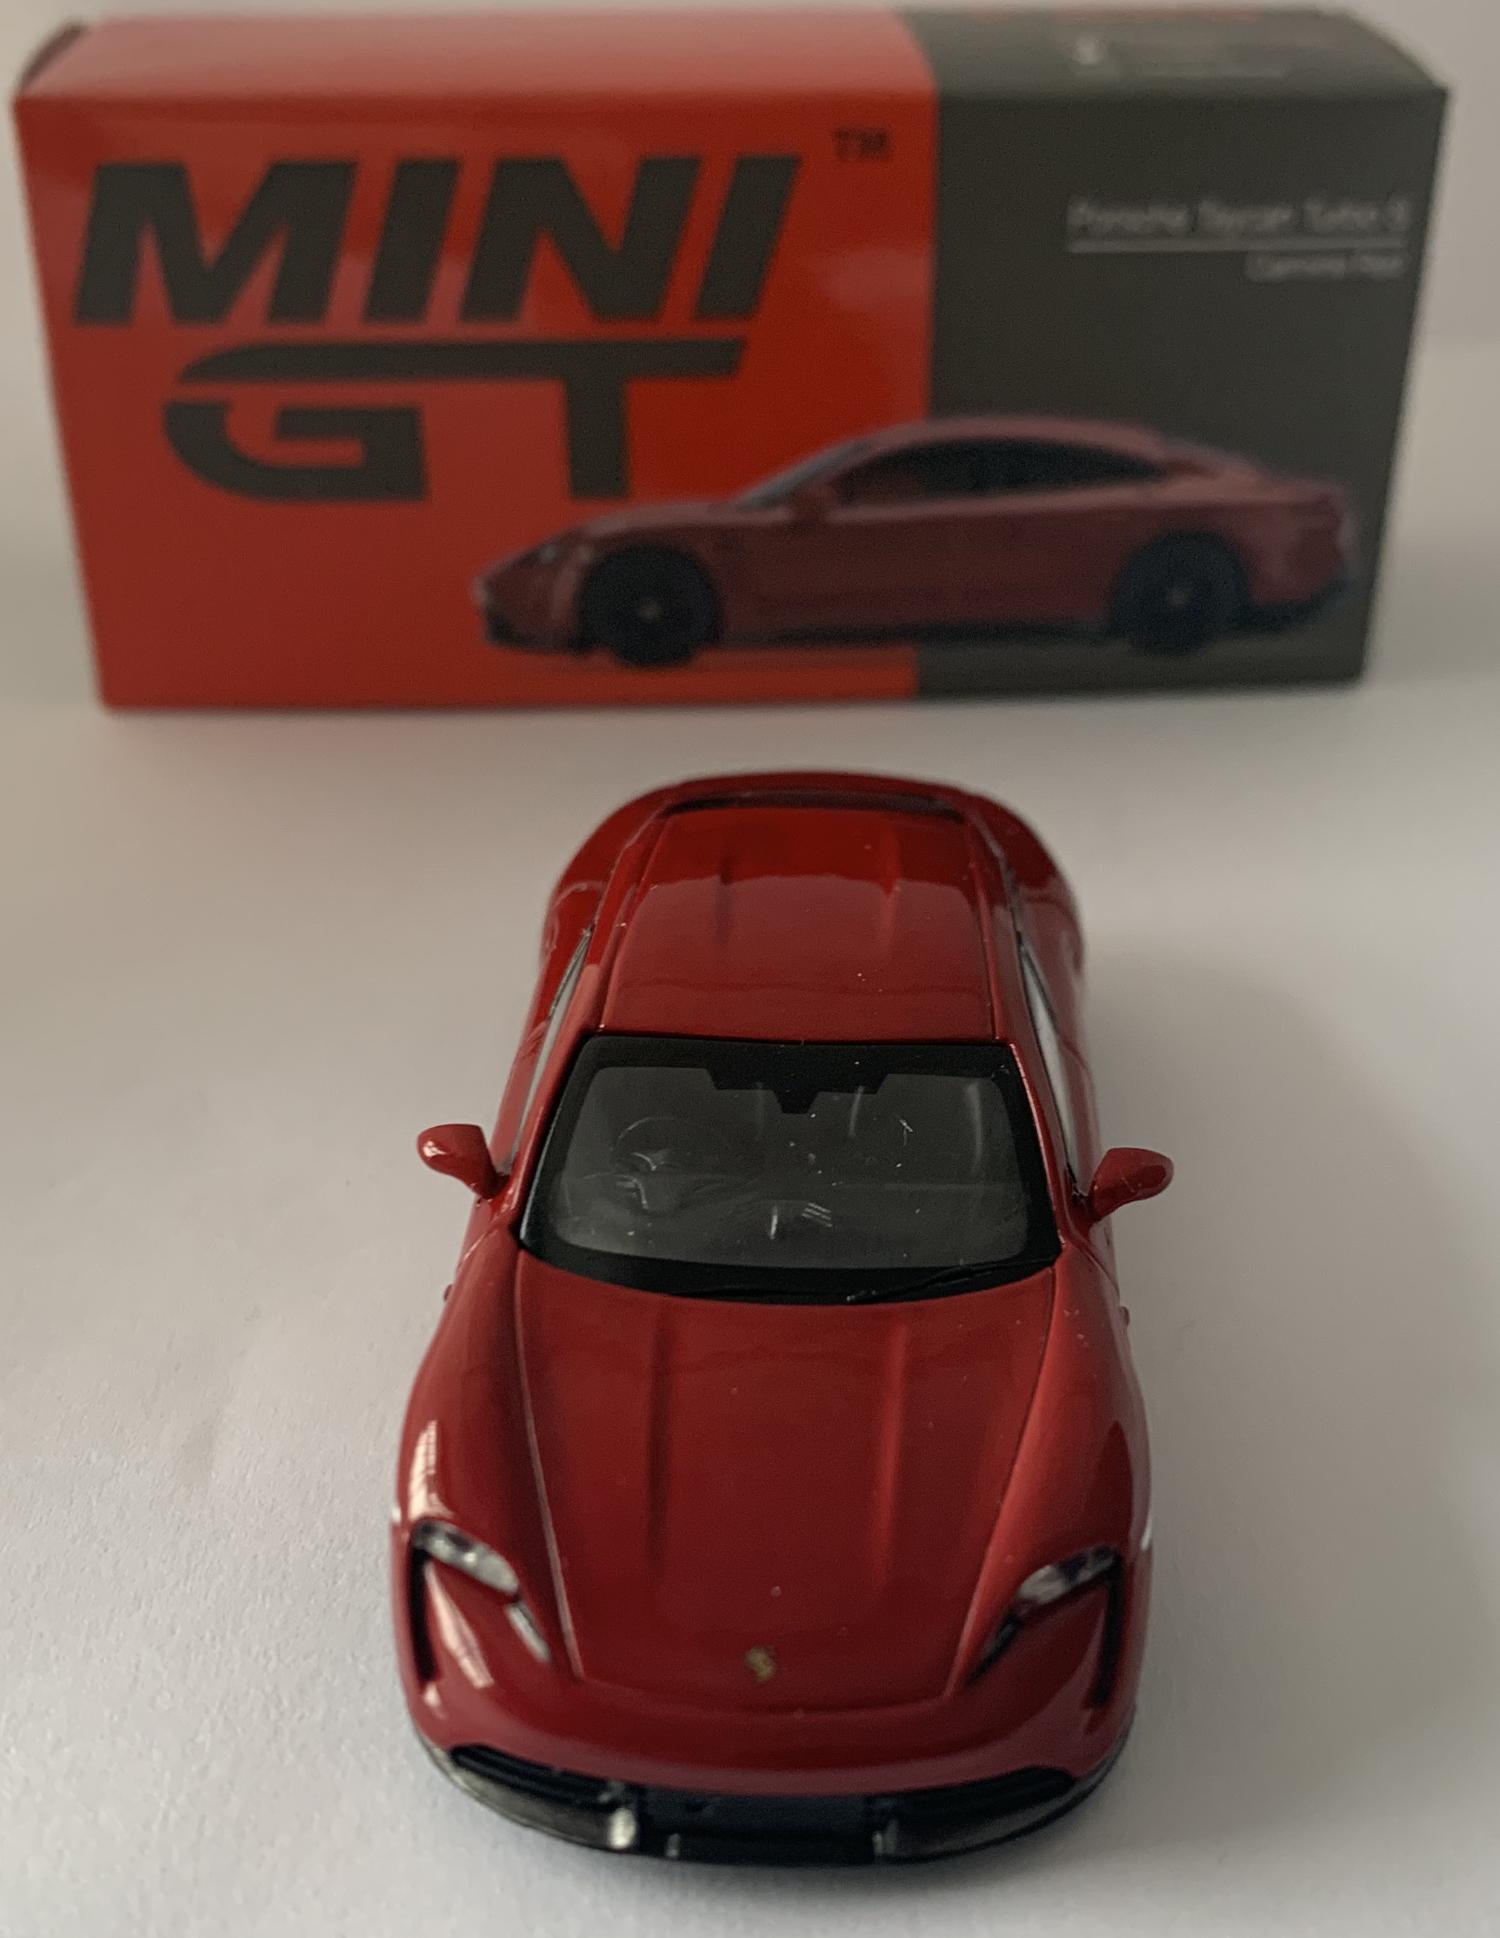 A good reproduction of the Porsche Taycan Turbo S with detail throughout, all authentically recreated. The model is presented in a box, the car is approx. 8 cm long and the box is 10 cm long